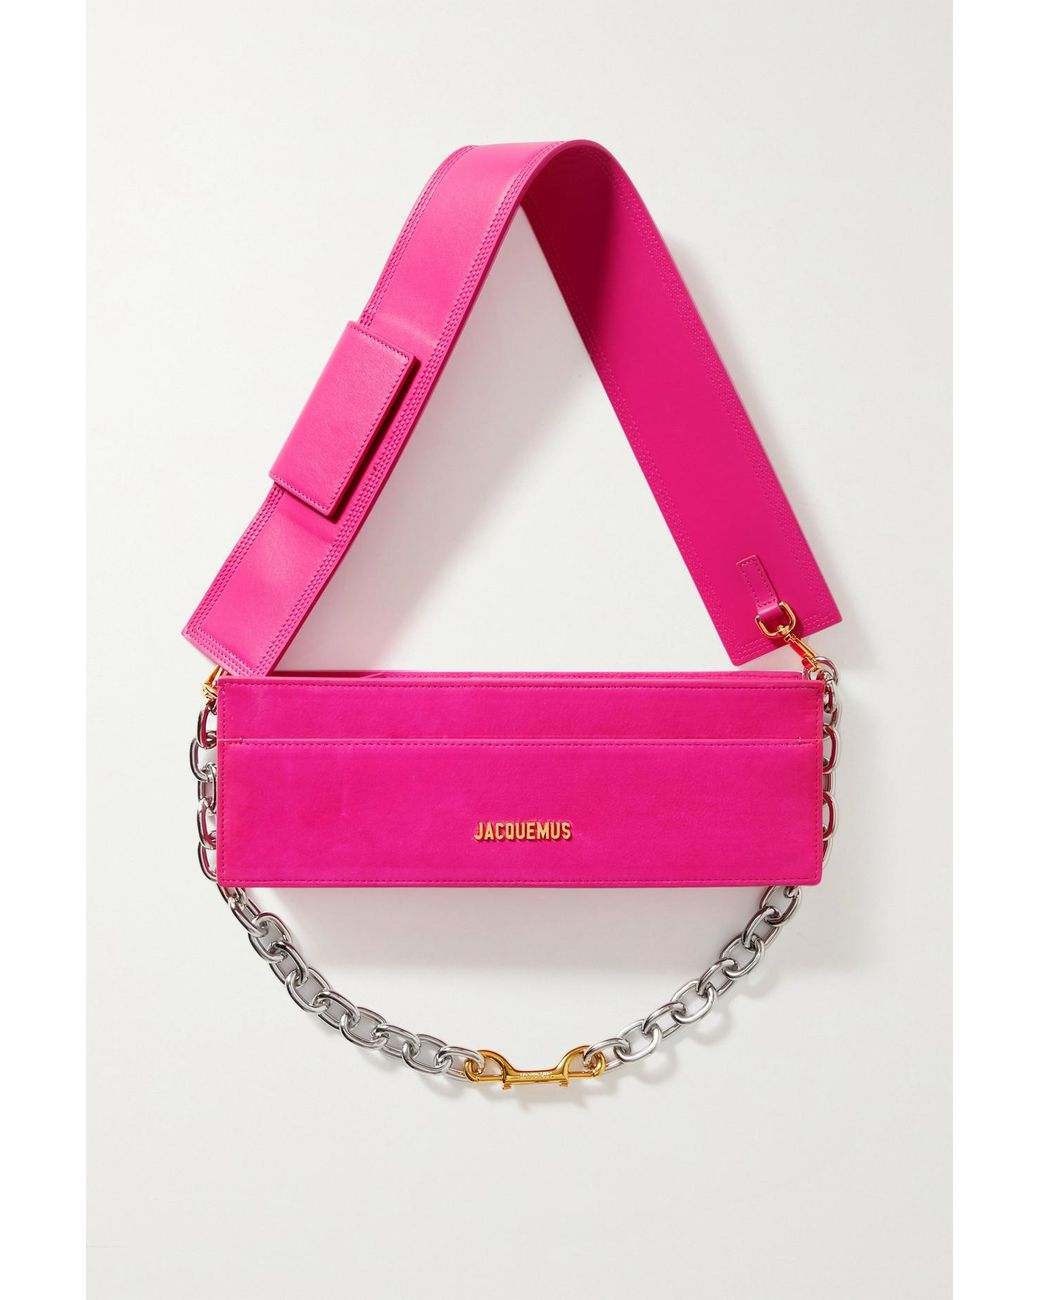 Jacquemus Le Ciuciu Leather And Suede Shoulder Bag in Pink | Lyst Canada